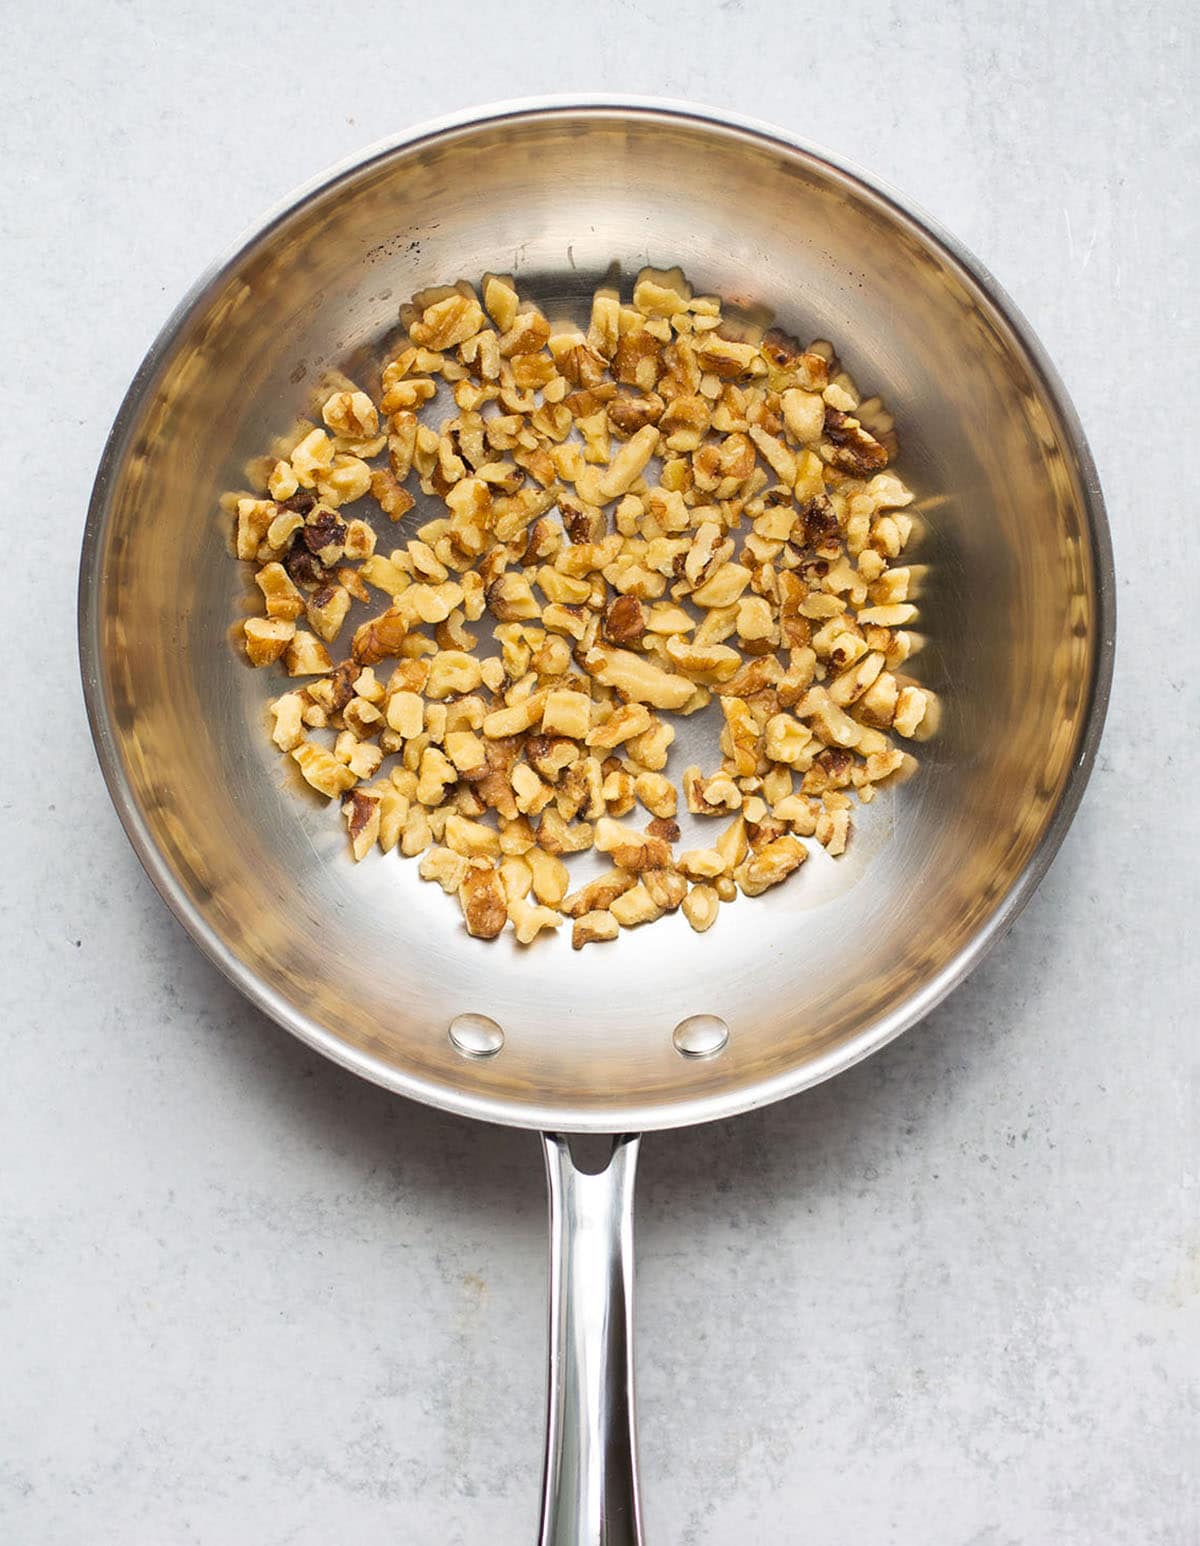 Toasting walnuts in a small skillet.